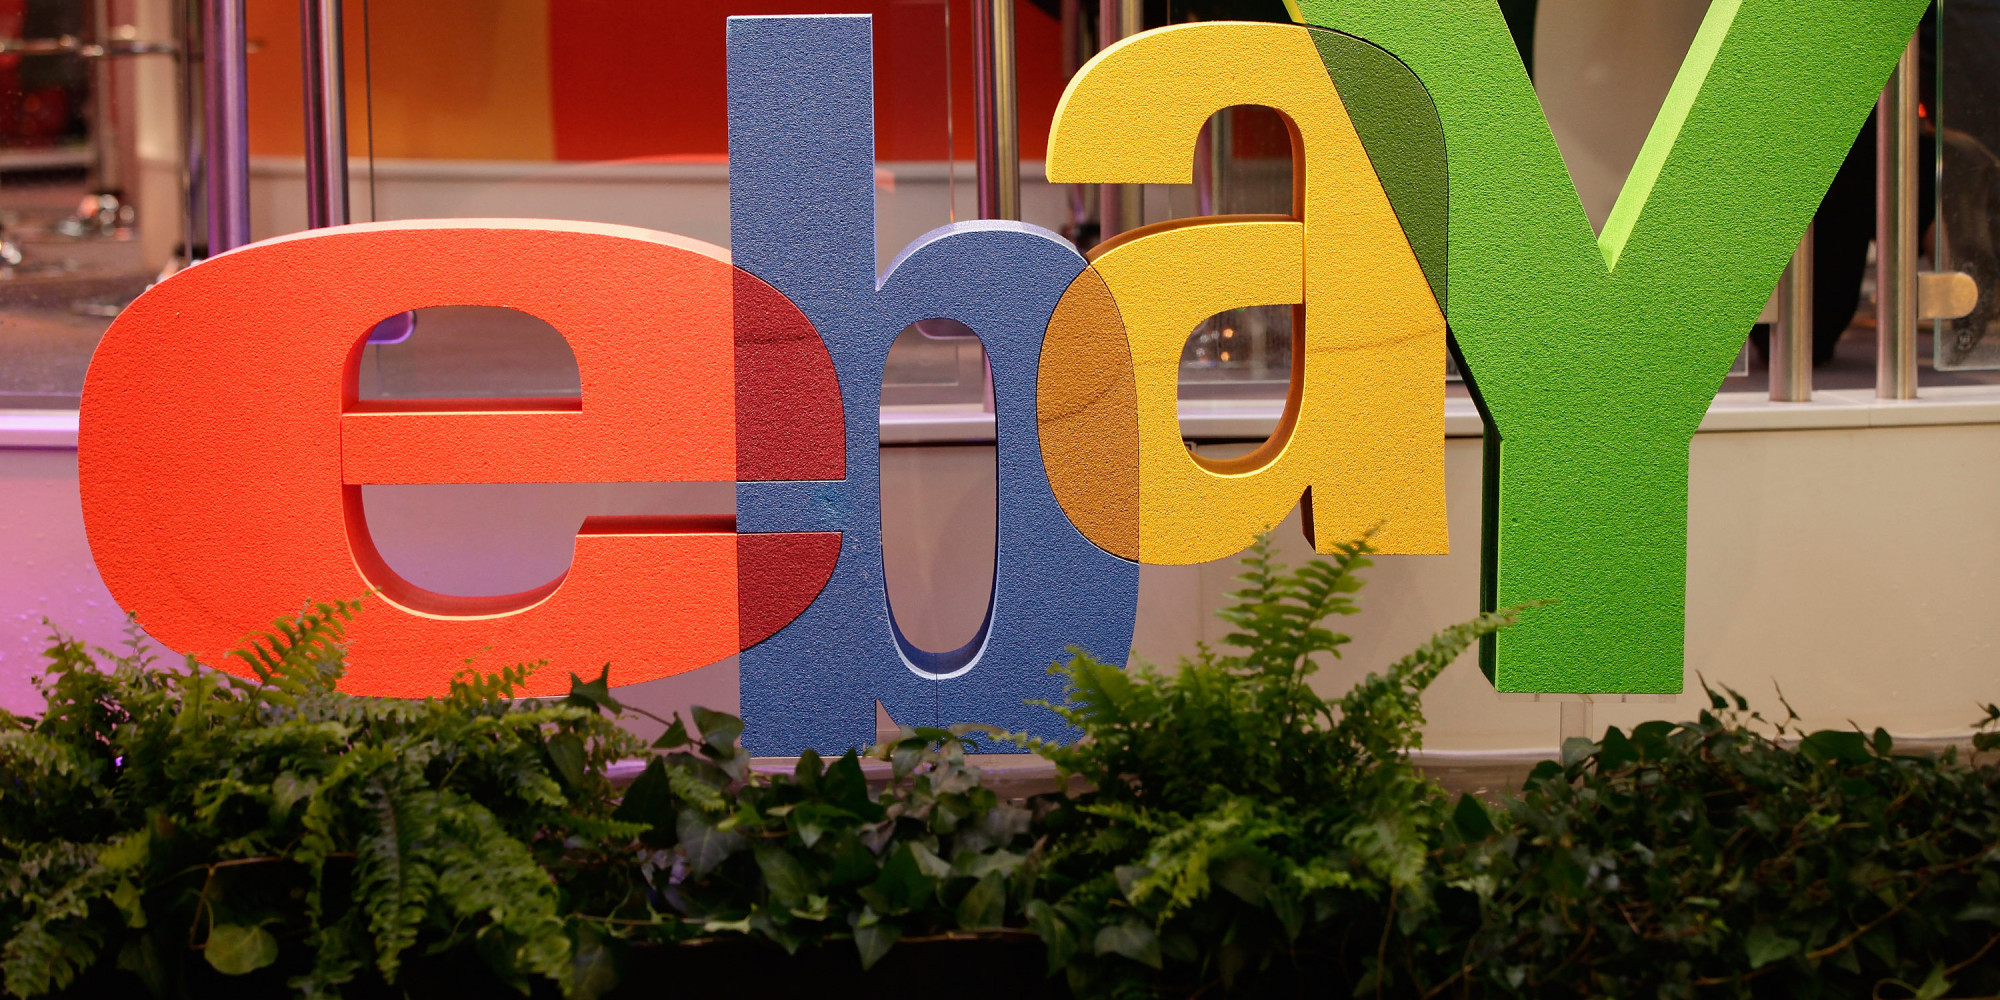 eBay At 21: Looking Back On Our History And Forward To The Trends Of Tomorrow | HuffPost UK